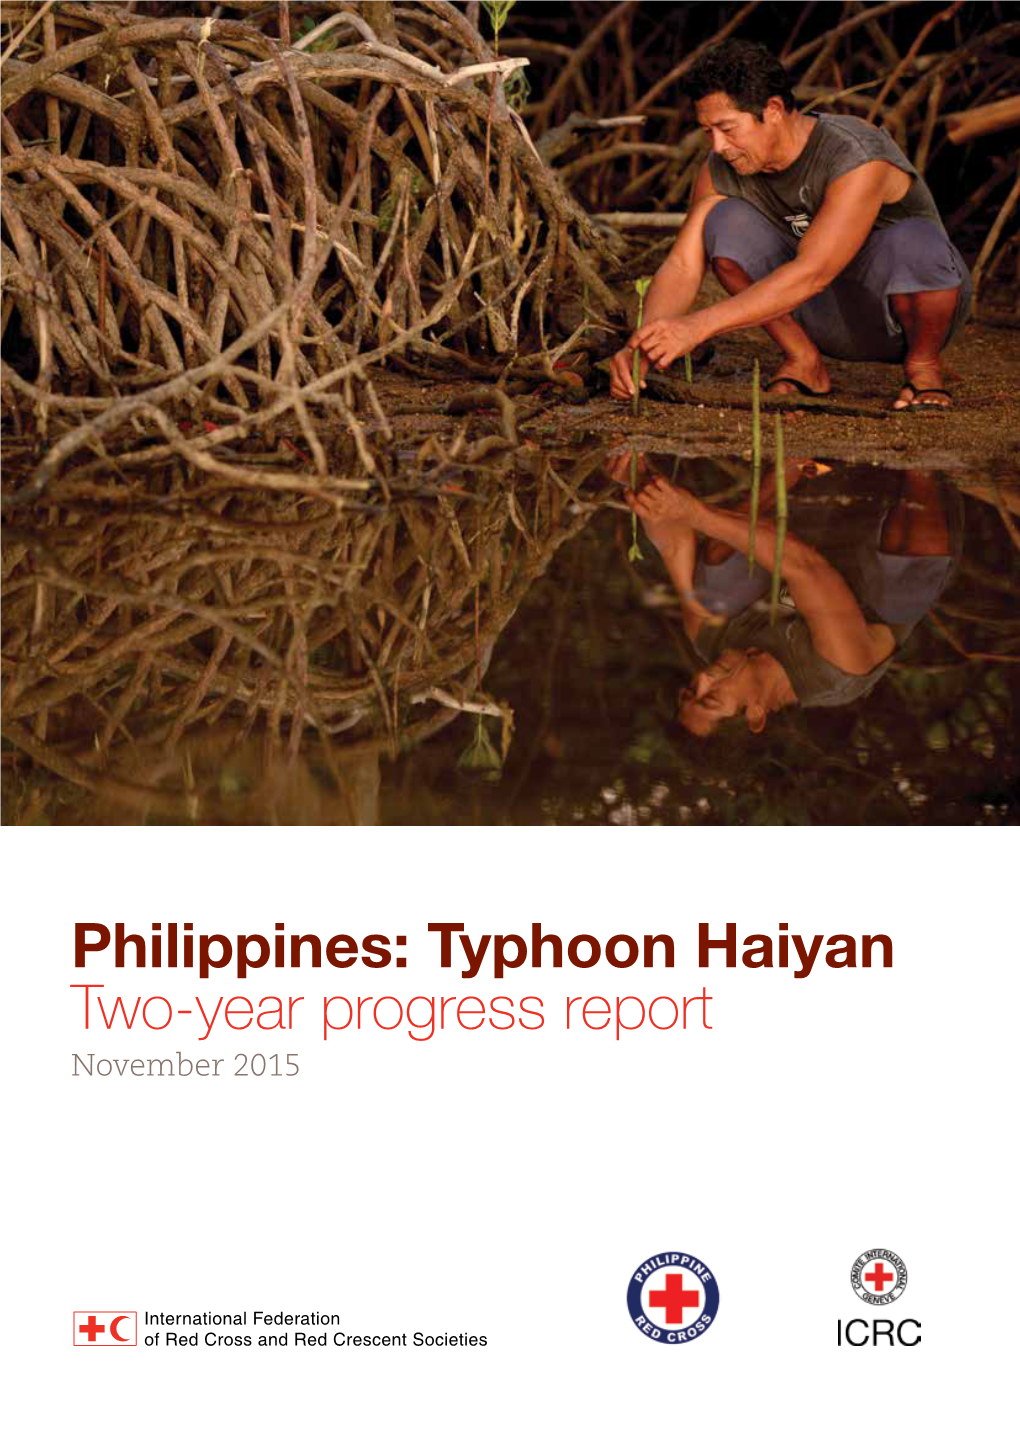 Philippines: Typhoon Haiyan Two-Year Progress Report November 2015 the Fundamental Principles of the International Red Cross and Red Crescent Movement